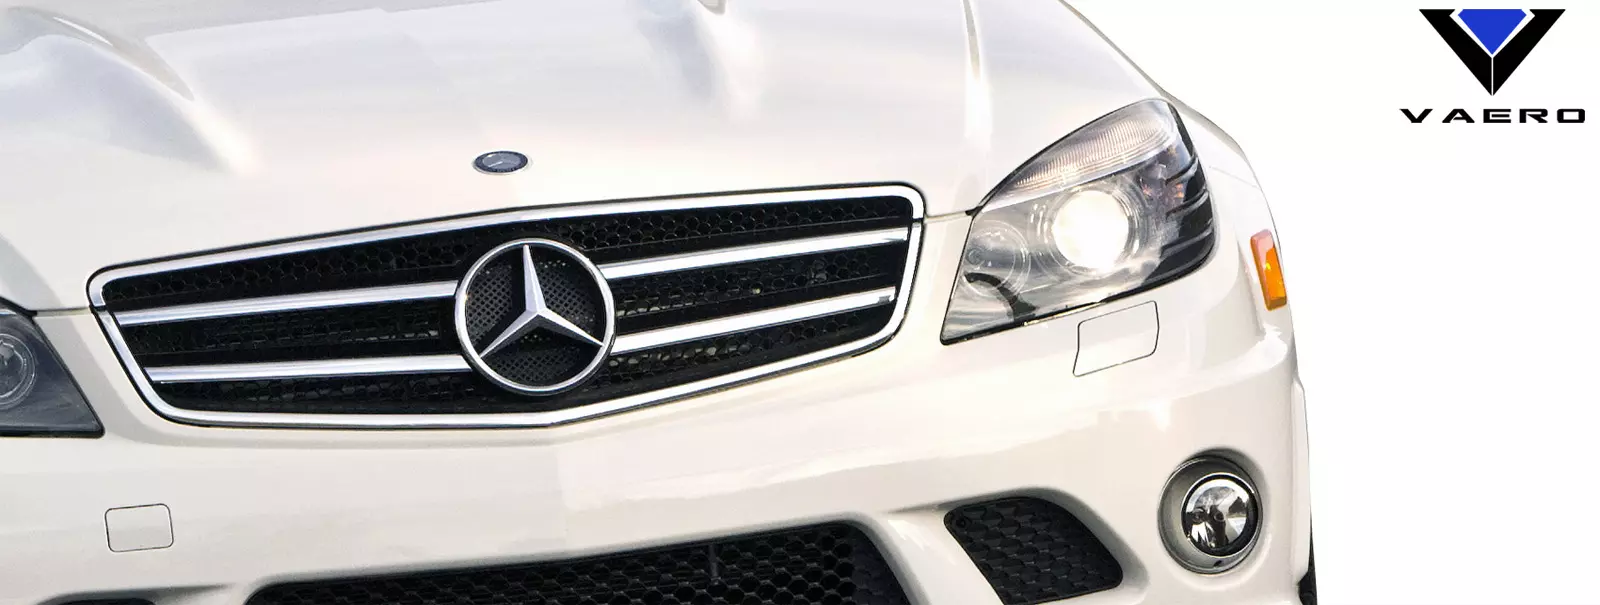 2008-2011 Mercedes C Class W204 Vaero C63 Look Conversion Grille and Mounting Accessories 1 Piece (S) - Image 2